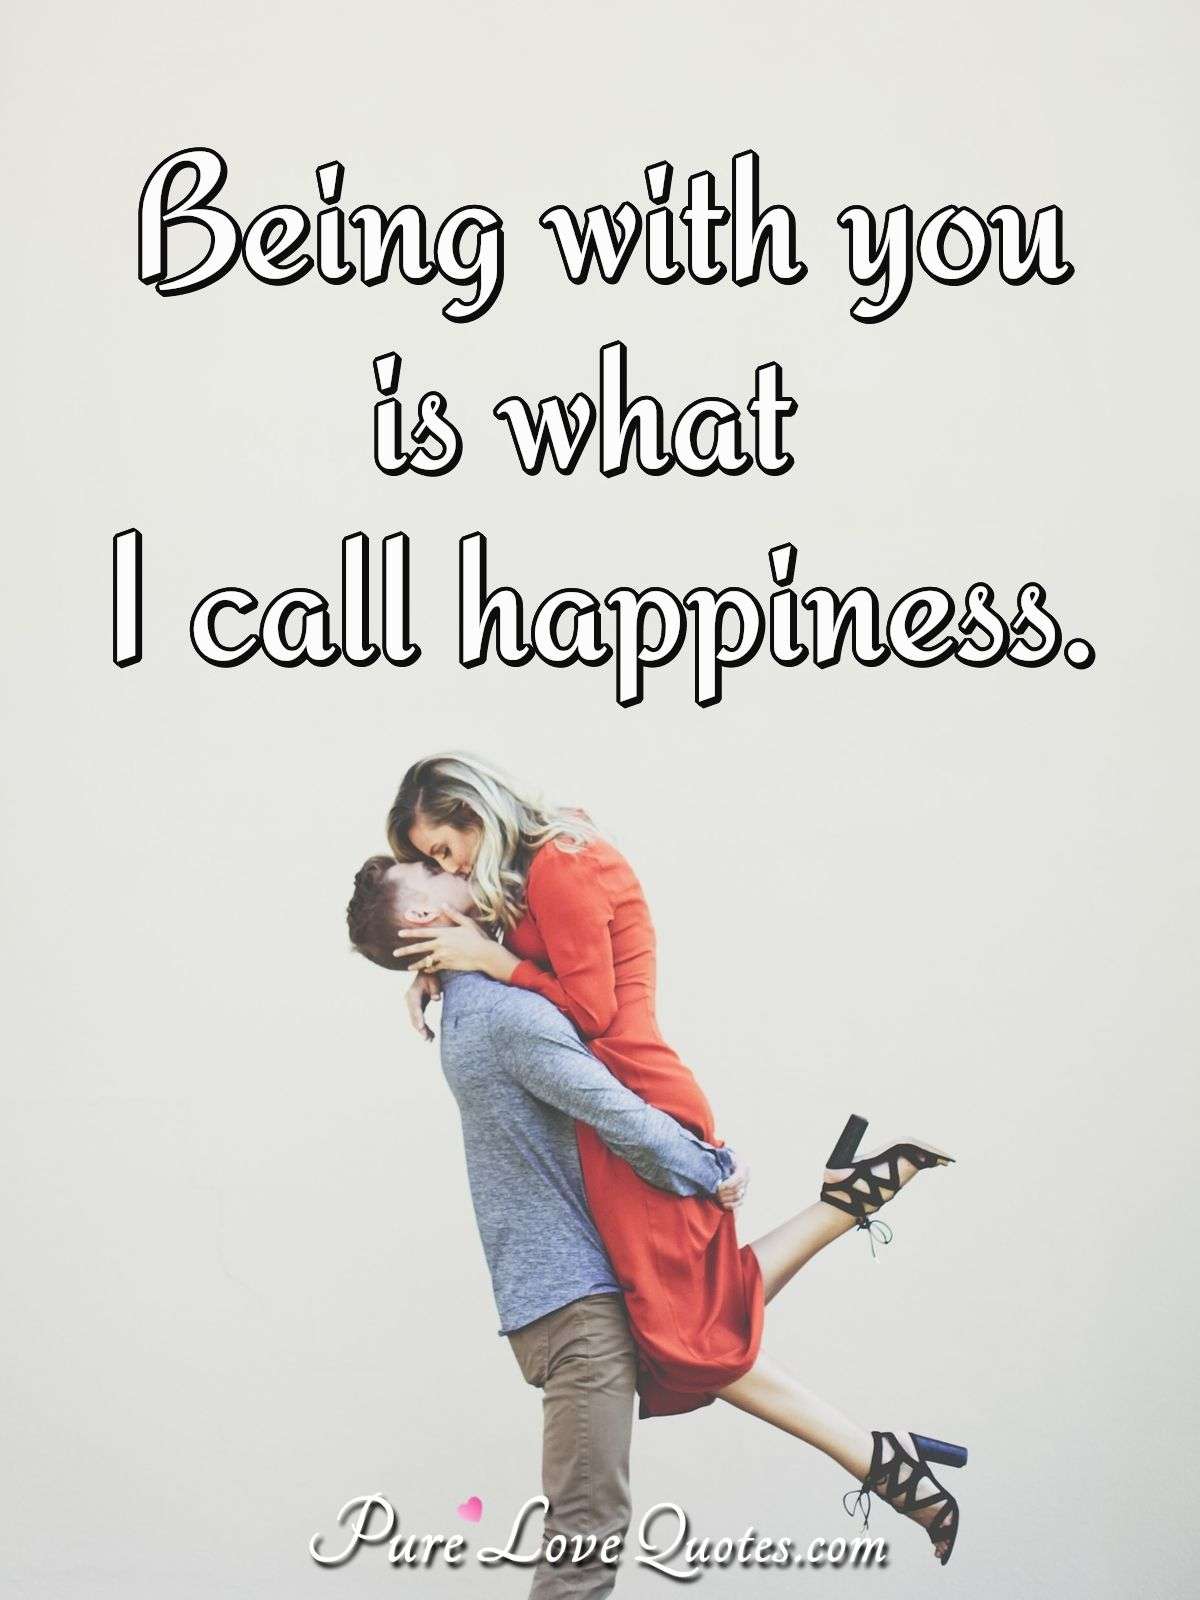 Being with you is what I call happiness. - Anonymous